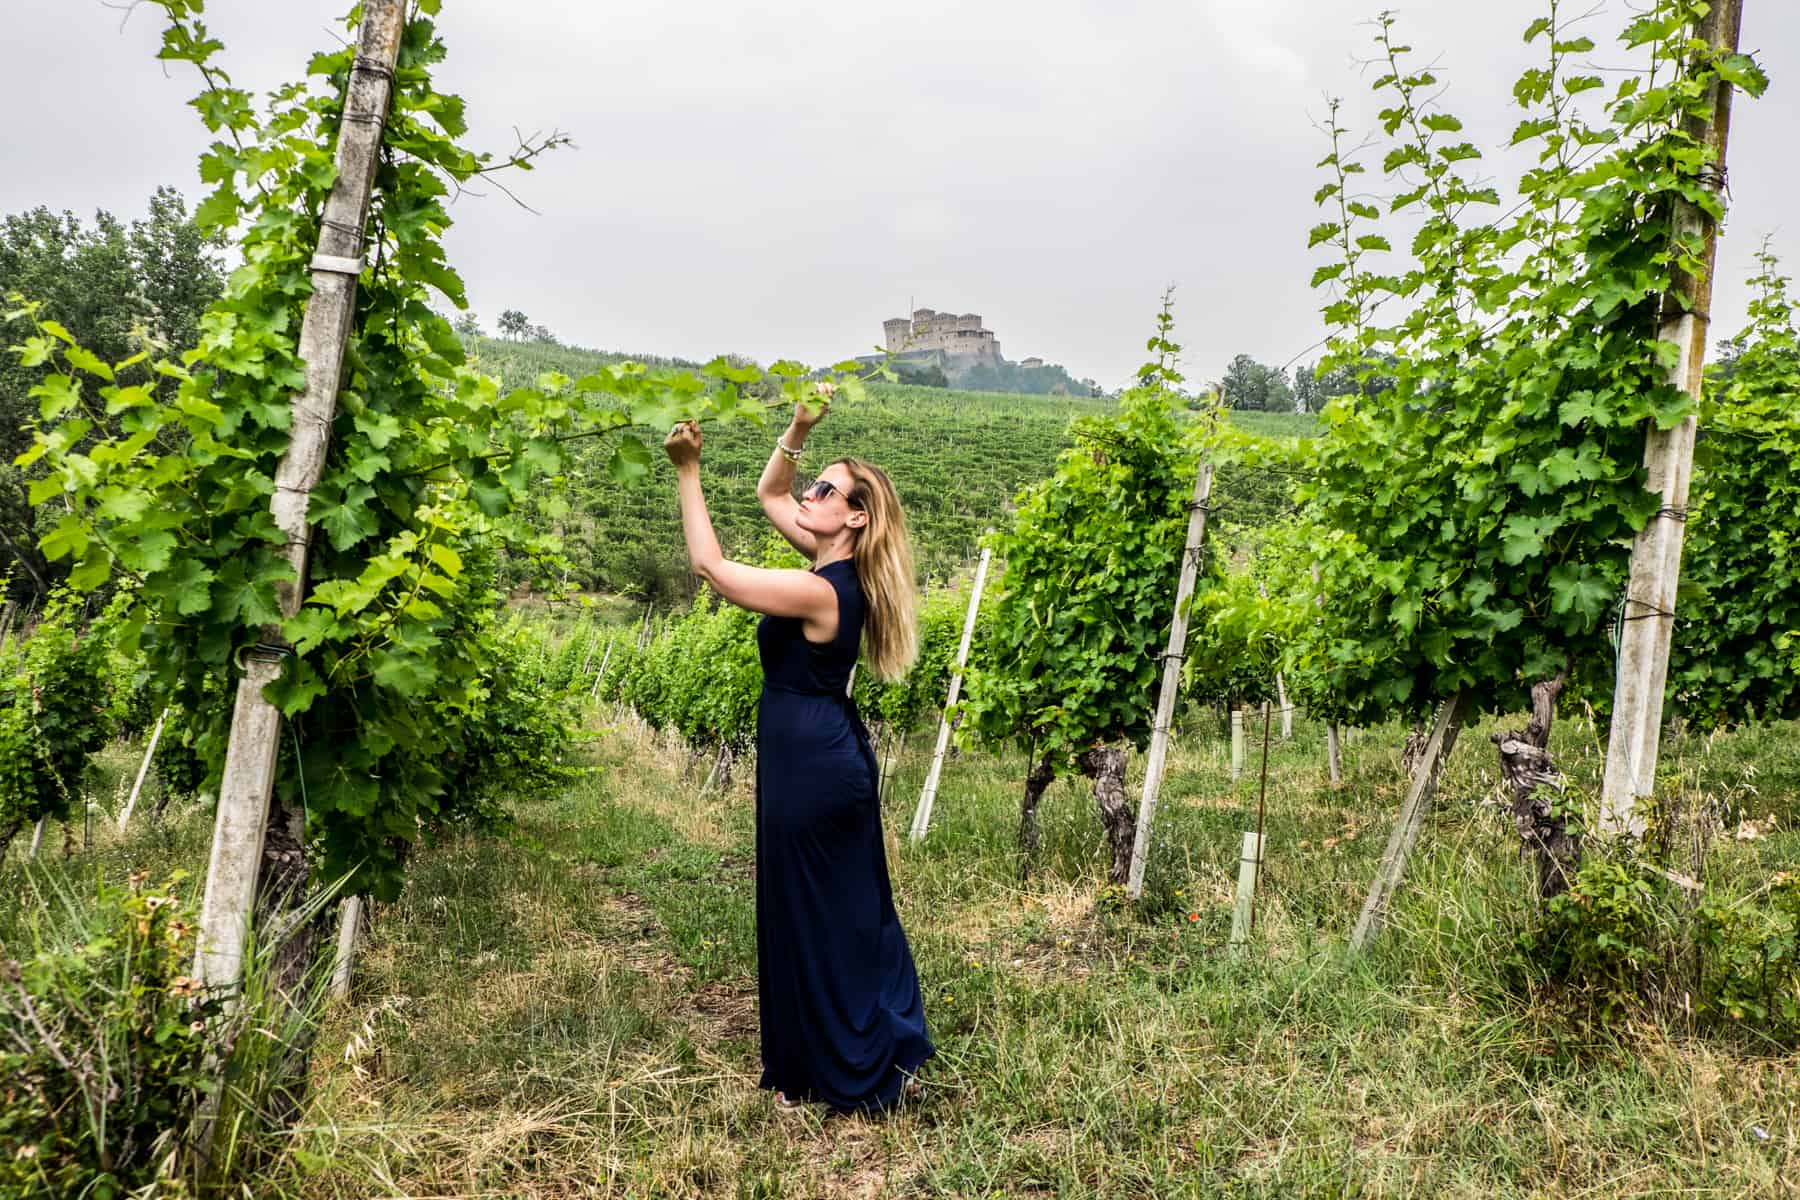 A woman in a blue dress looks closely at a branch in a green vineyard backed by a castle on a hill. 